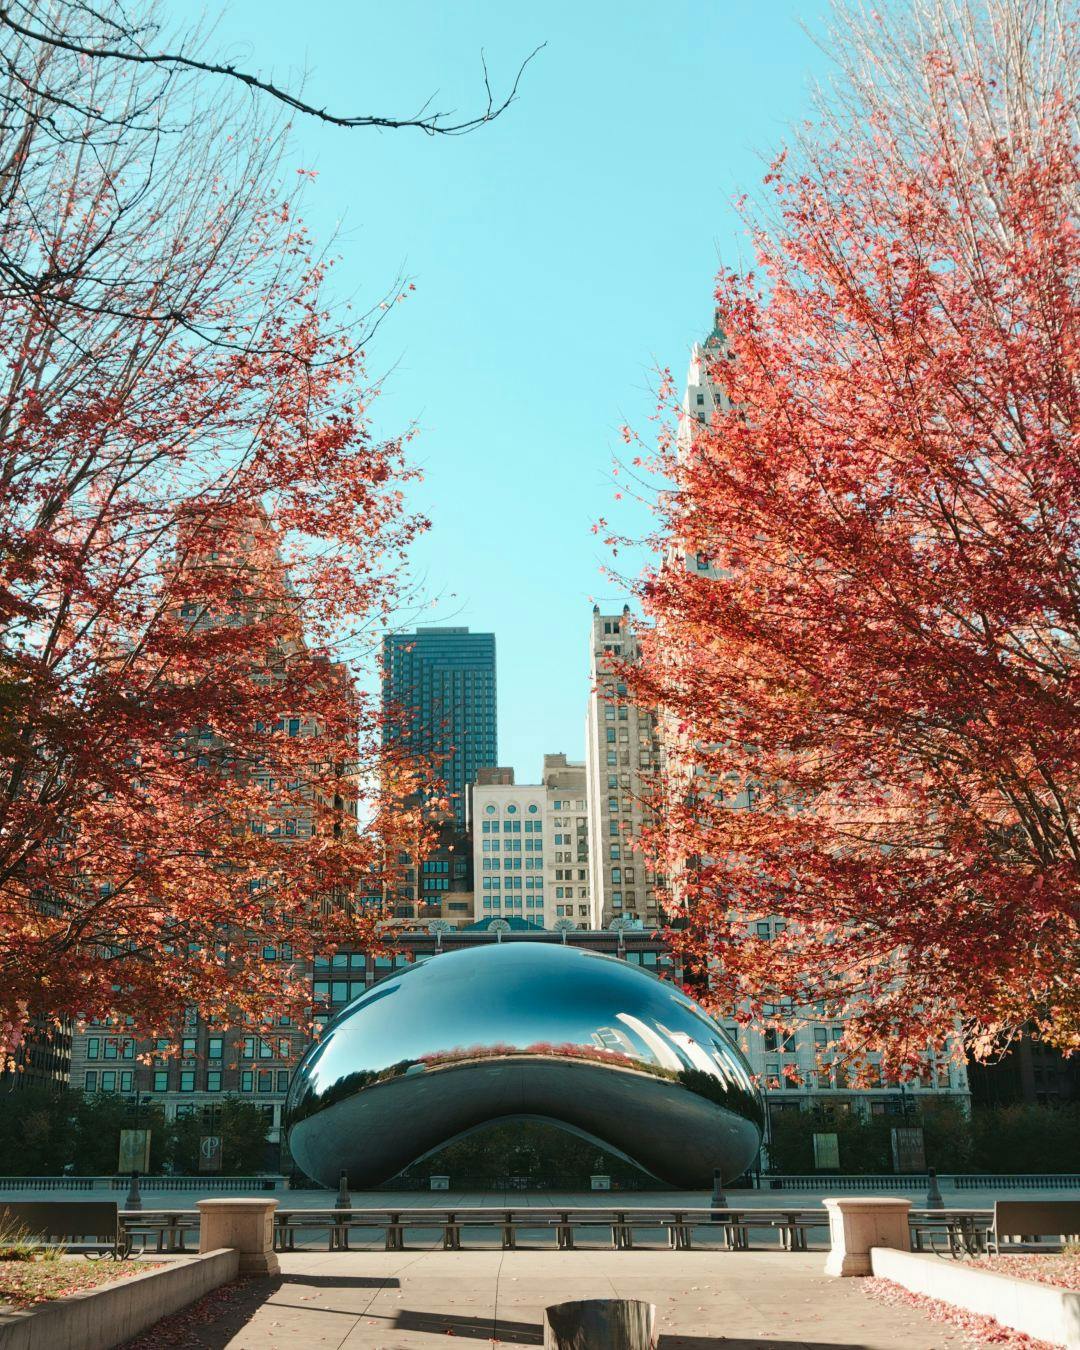 The Cloud Gate sculpture in Chicago